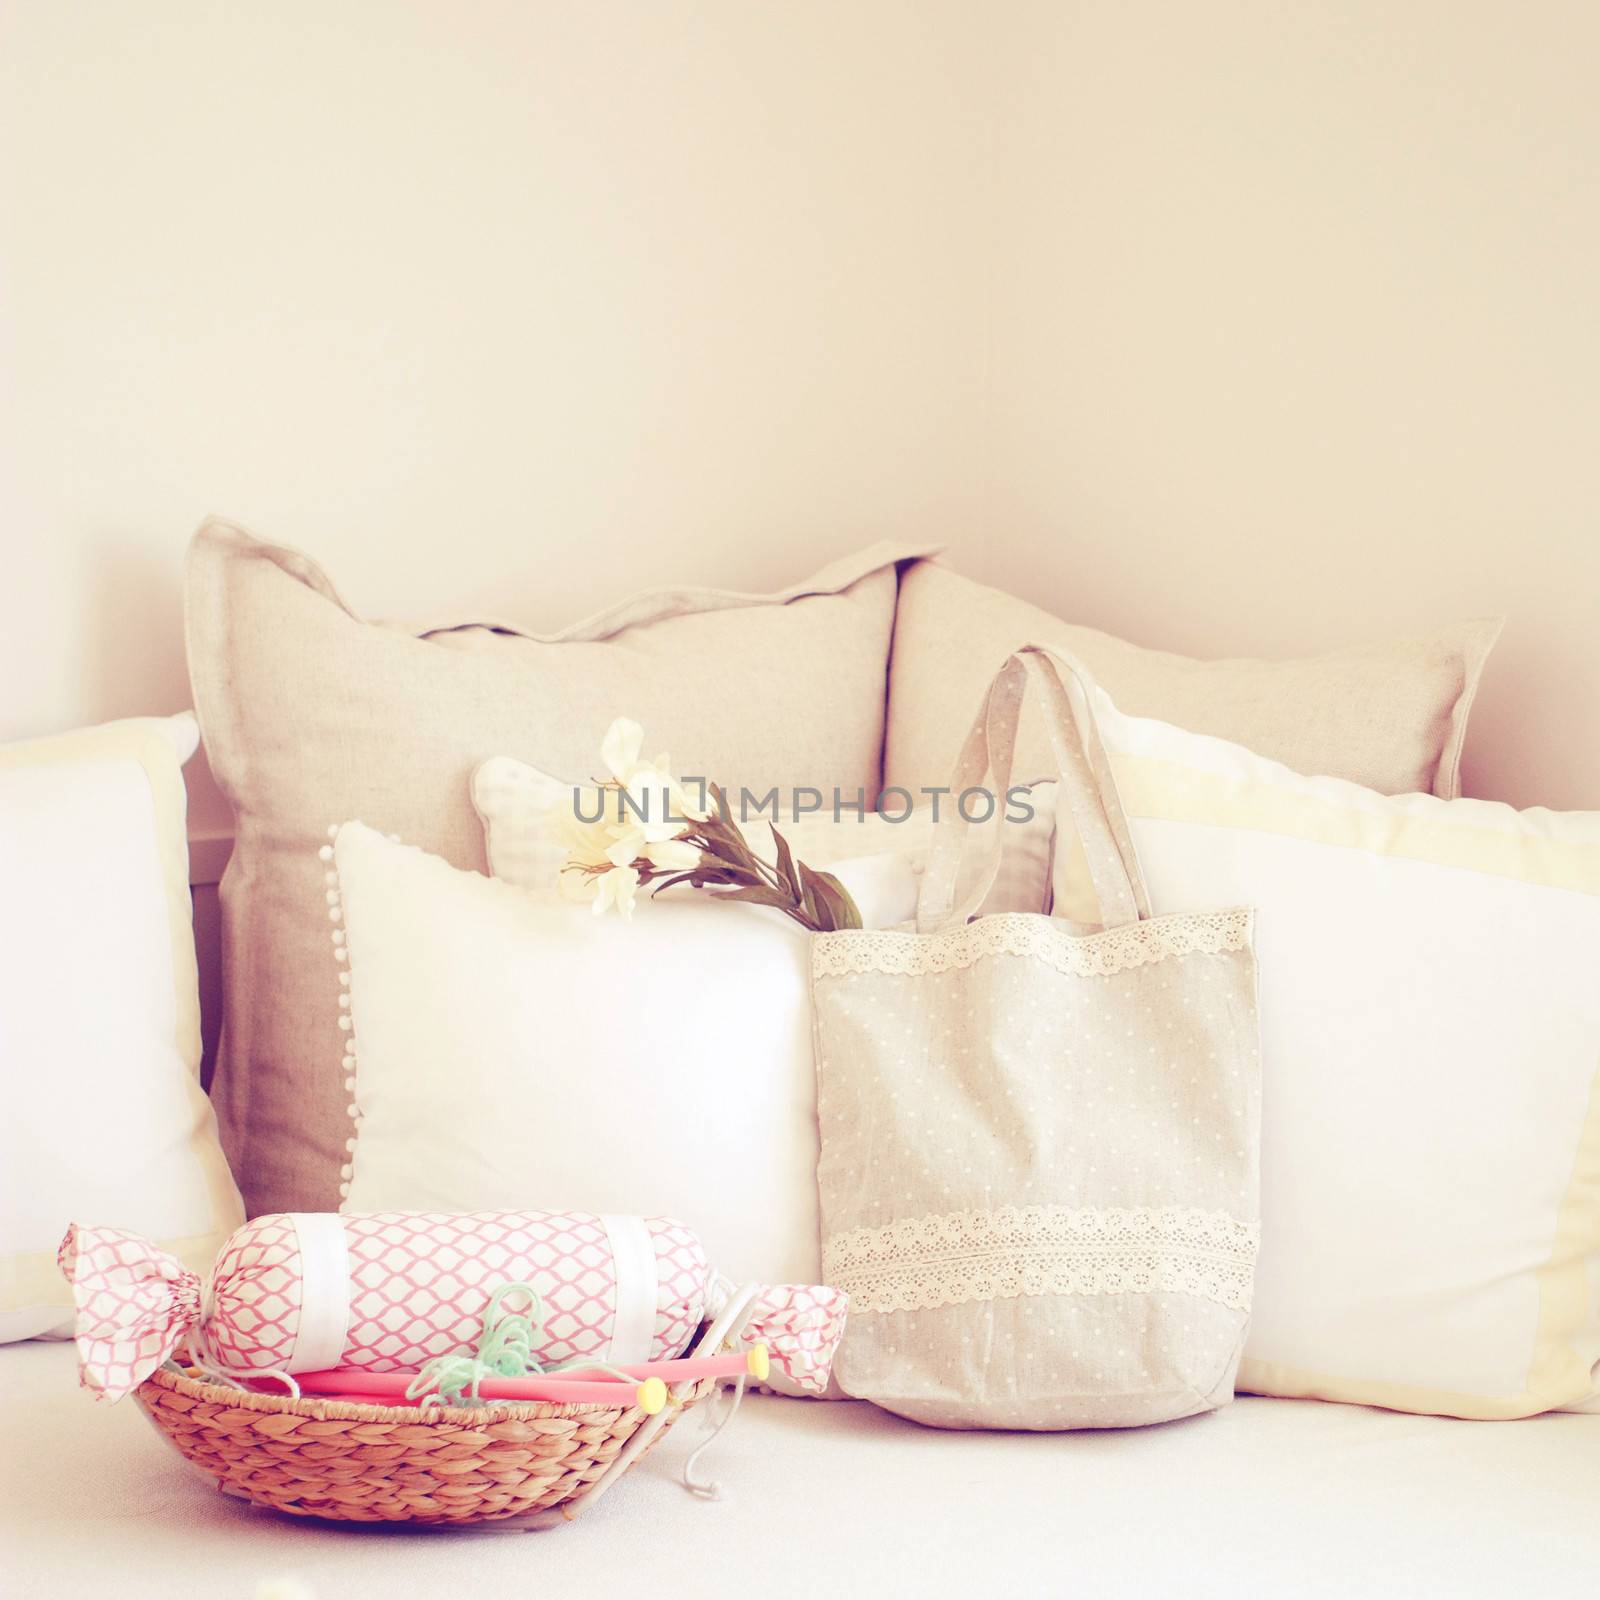 Knitting needles in basket and cute tote bag on the bed with ret by nuchylee